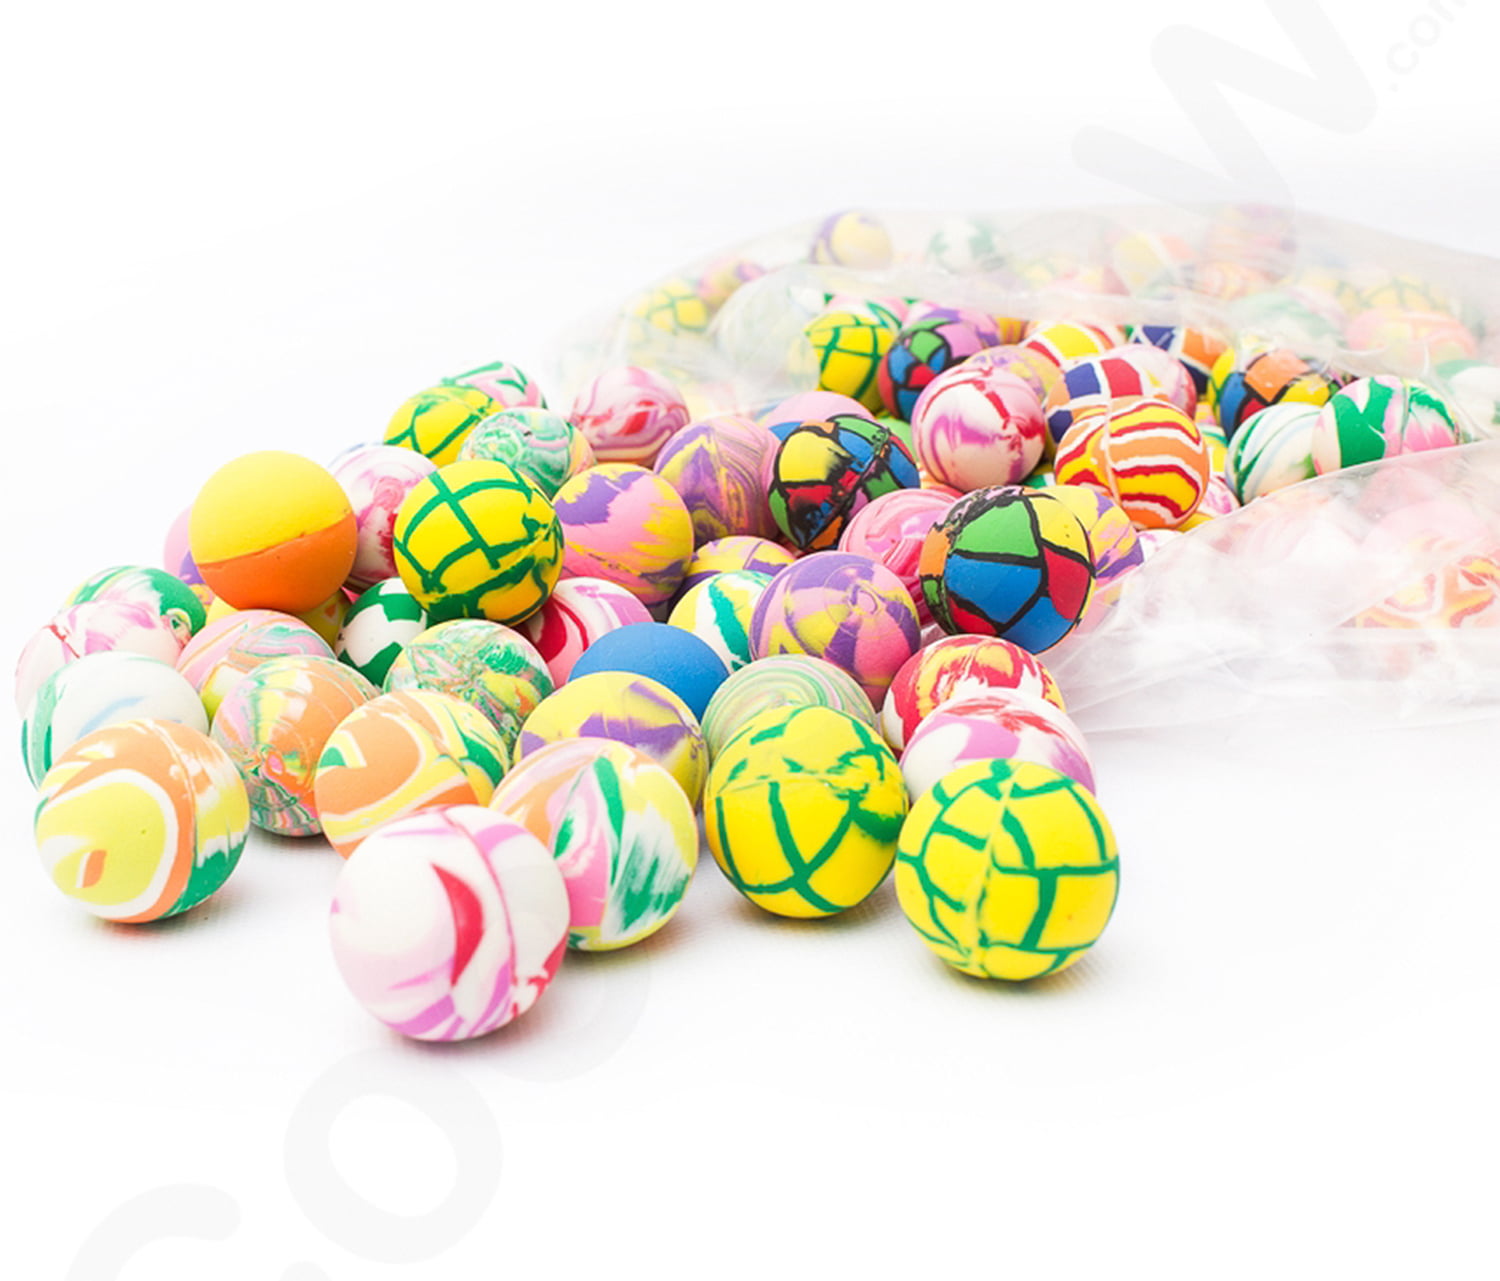 19 mm Super Bouncy Balls 3/4 inch Pack of 10 